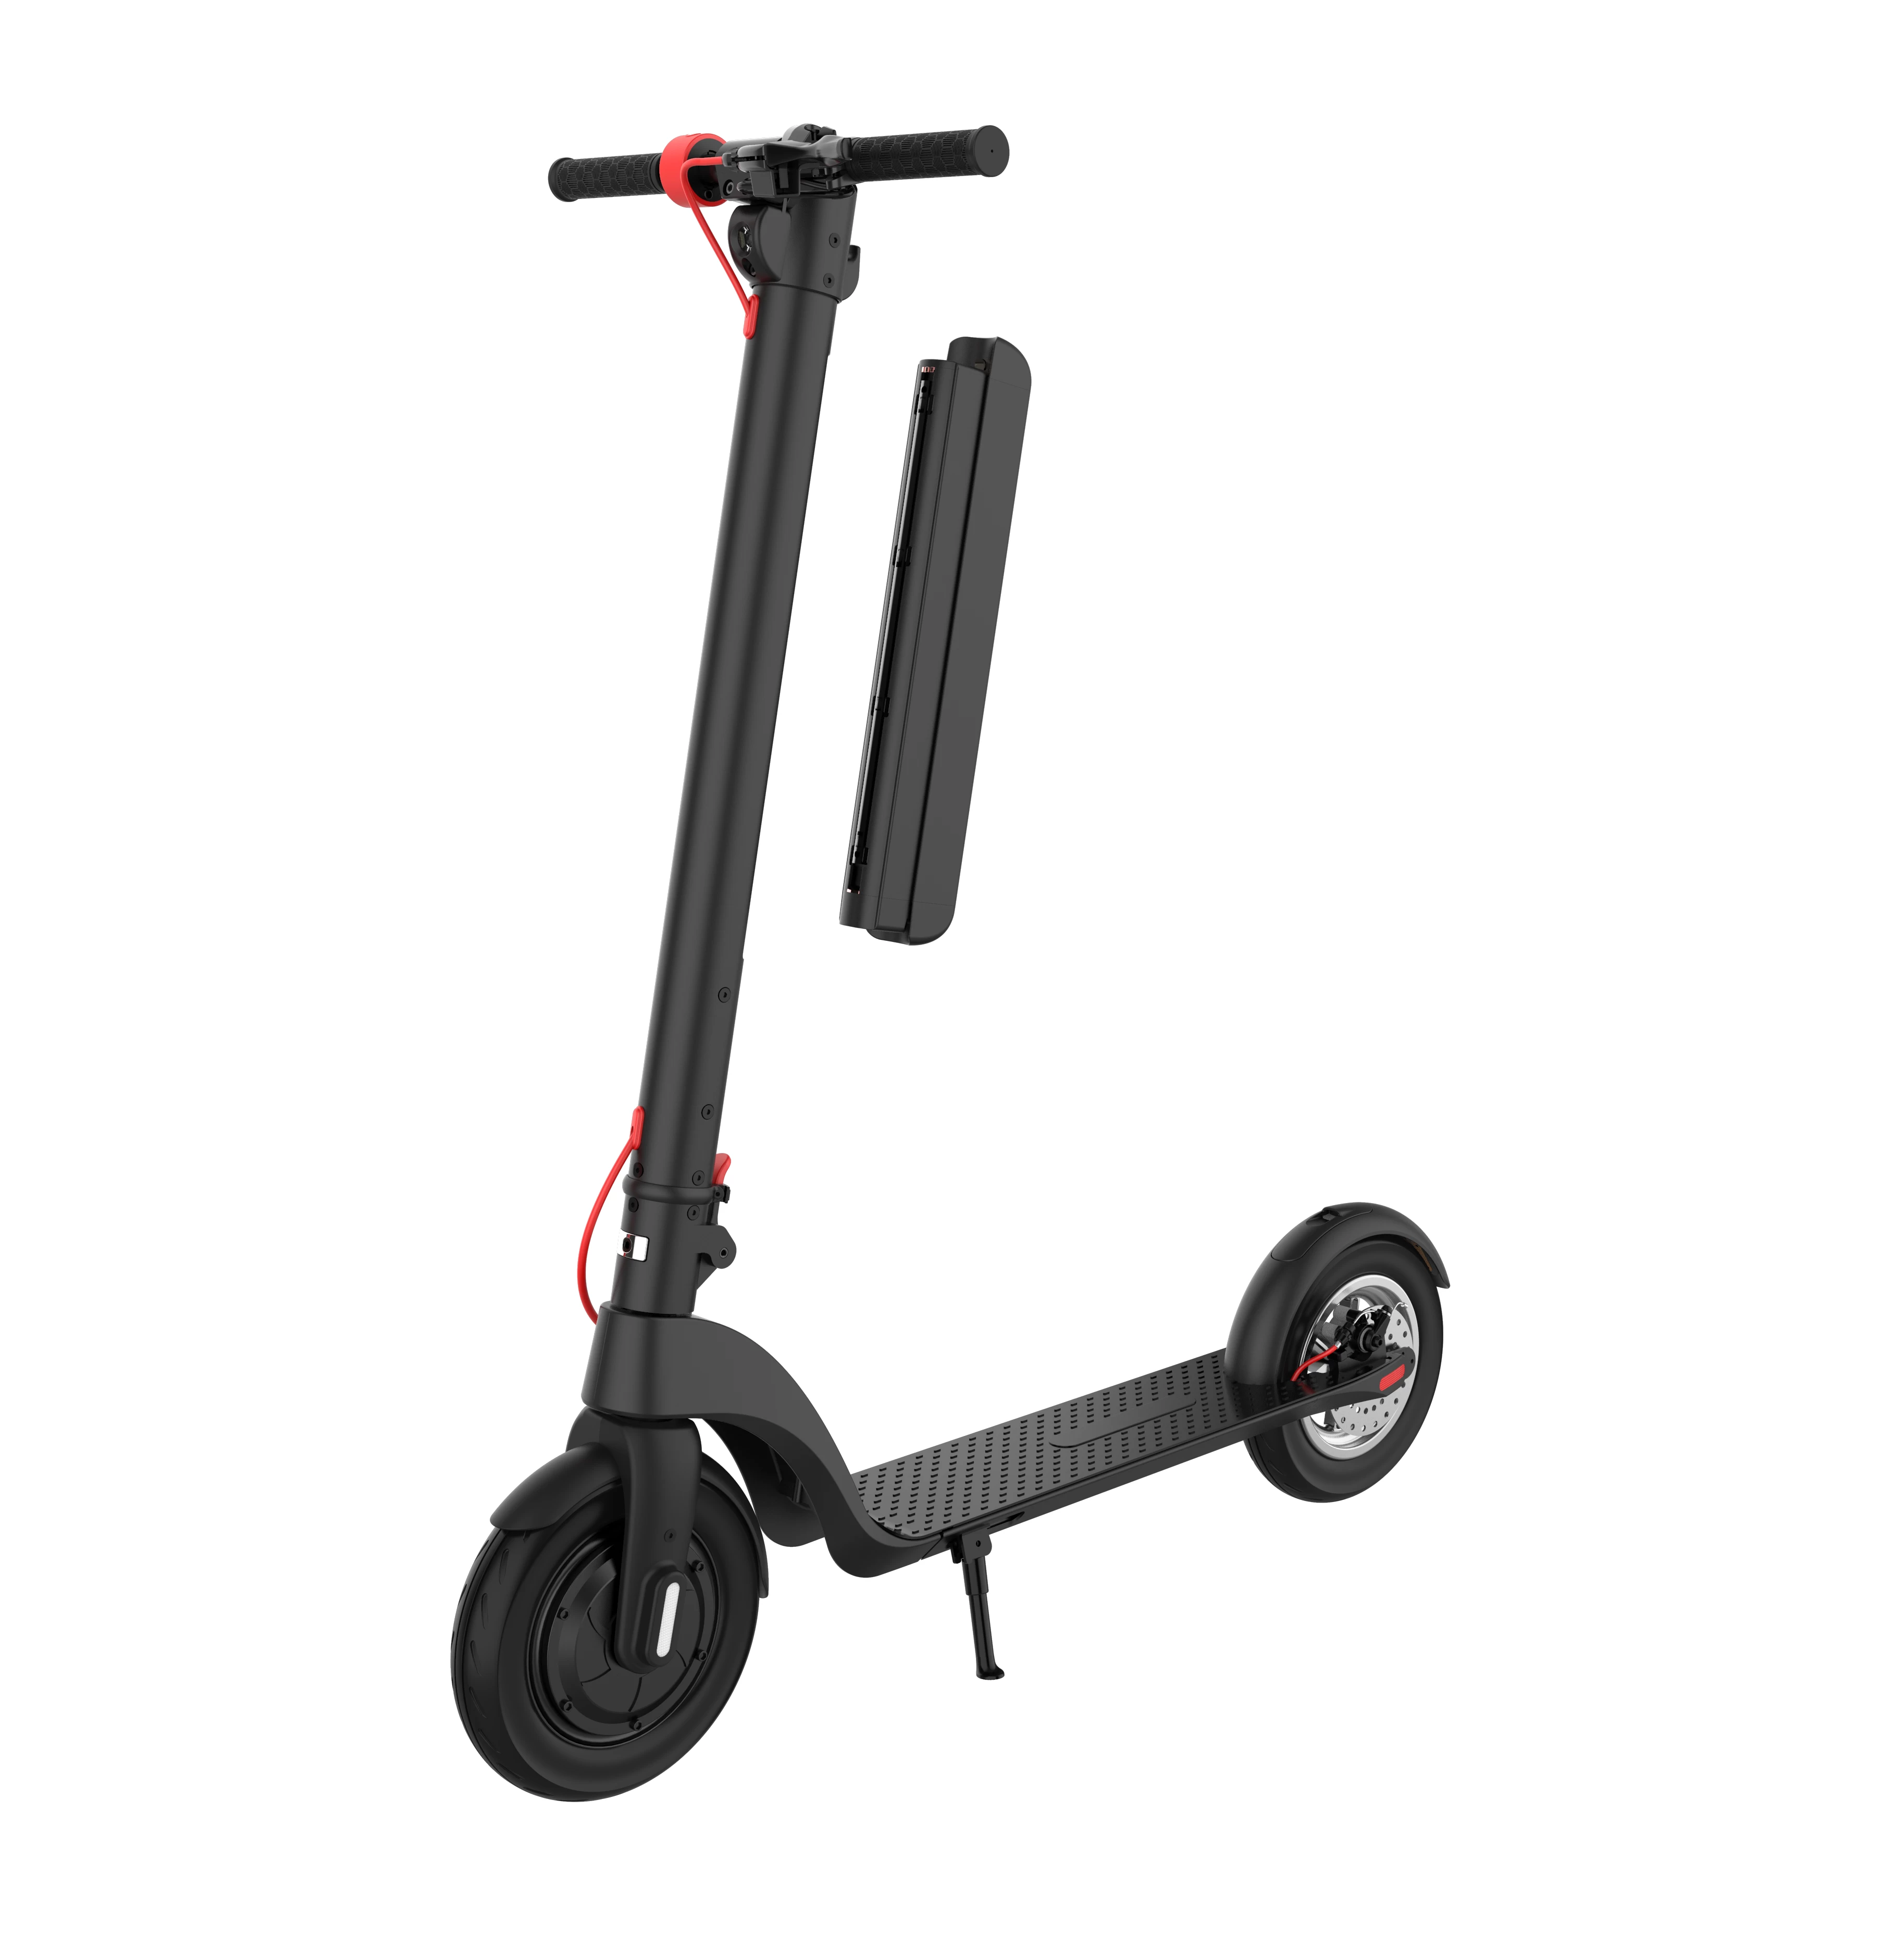 350w 36v Lithium Battery Best Full Electric Scooter For Women Teenager